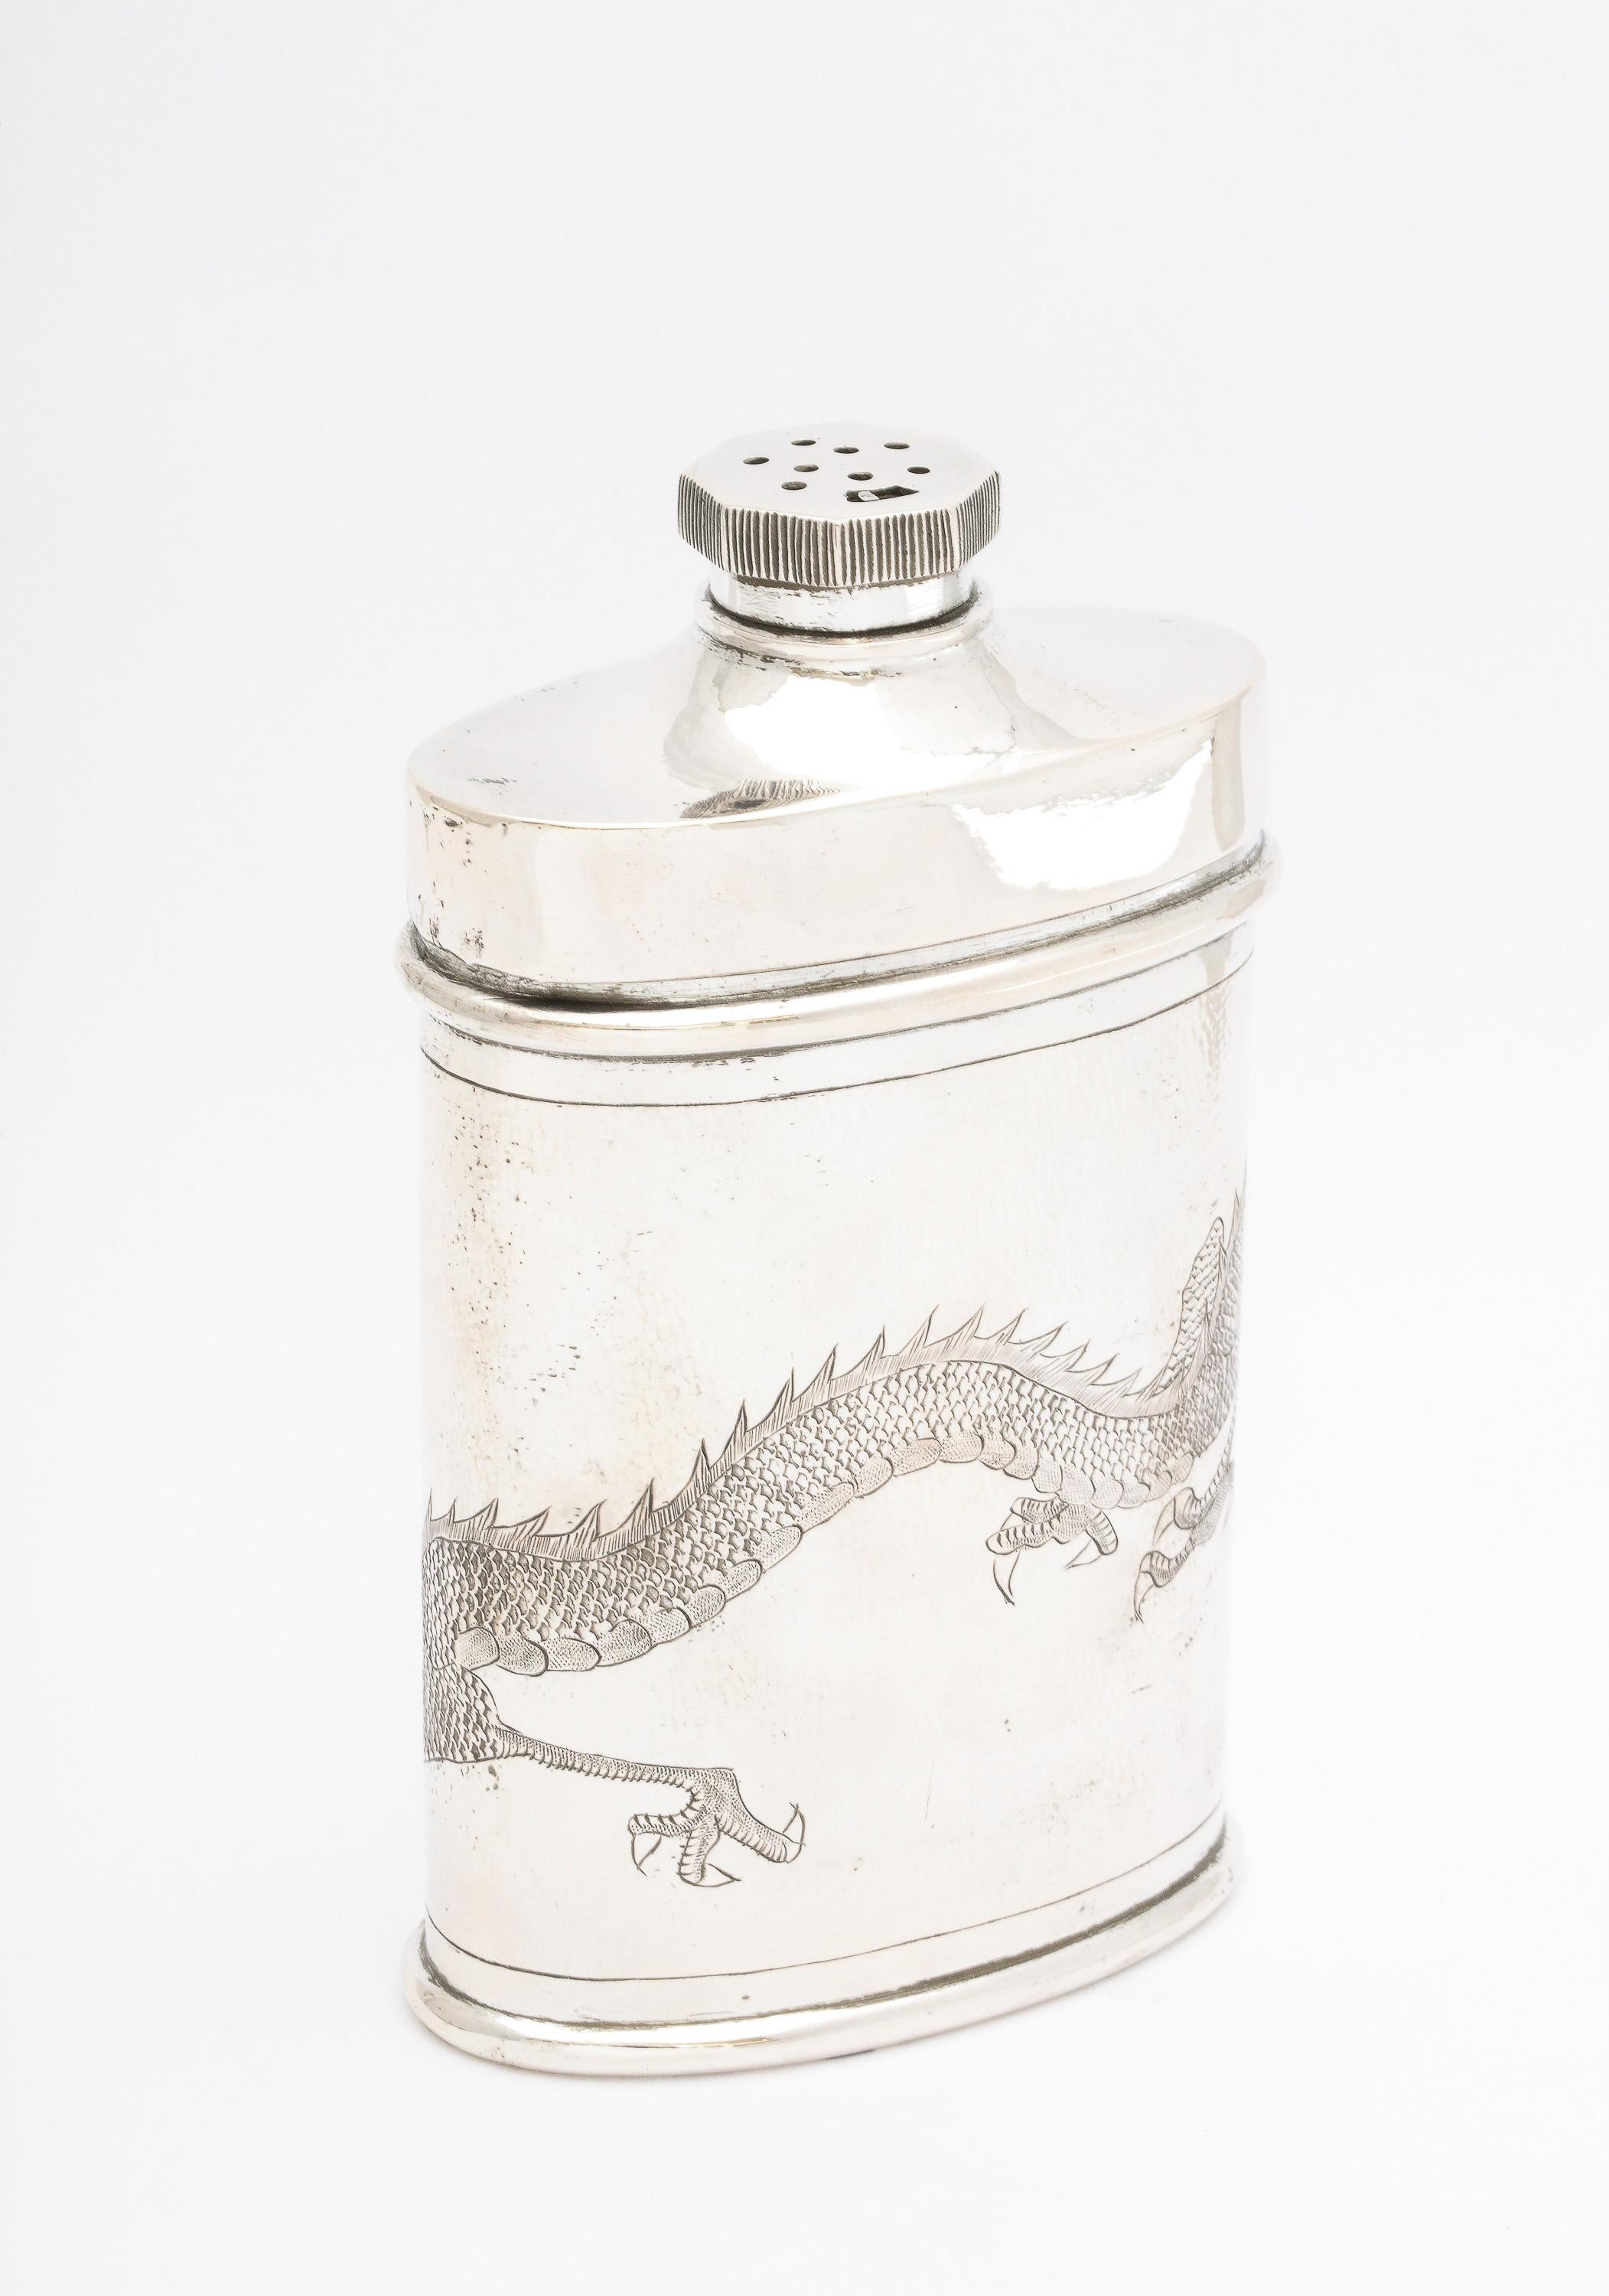 Early 20th Century Chinese Export Powder/Talc Shaker For Sale